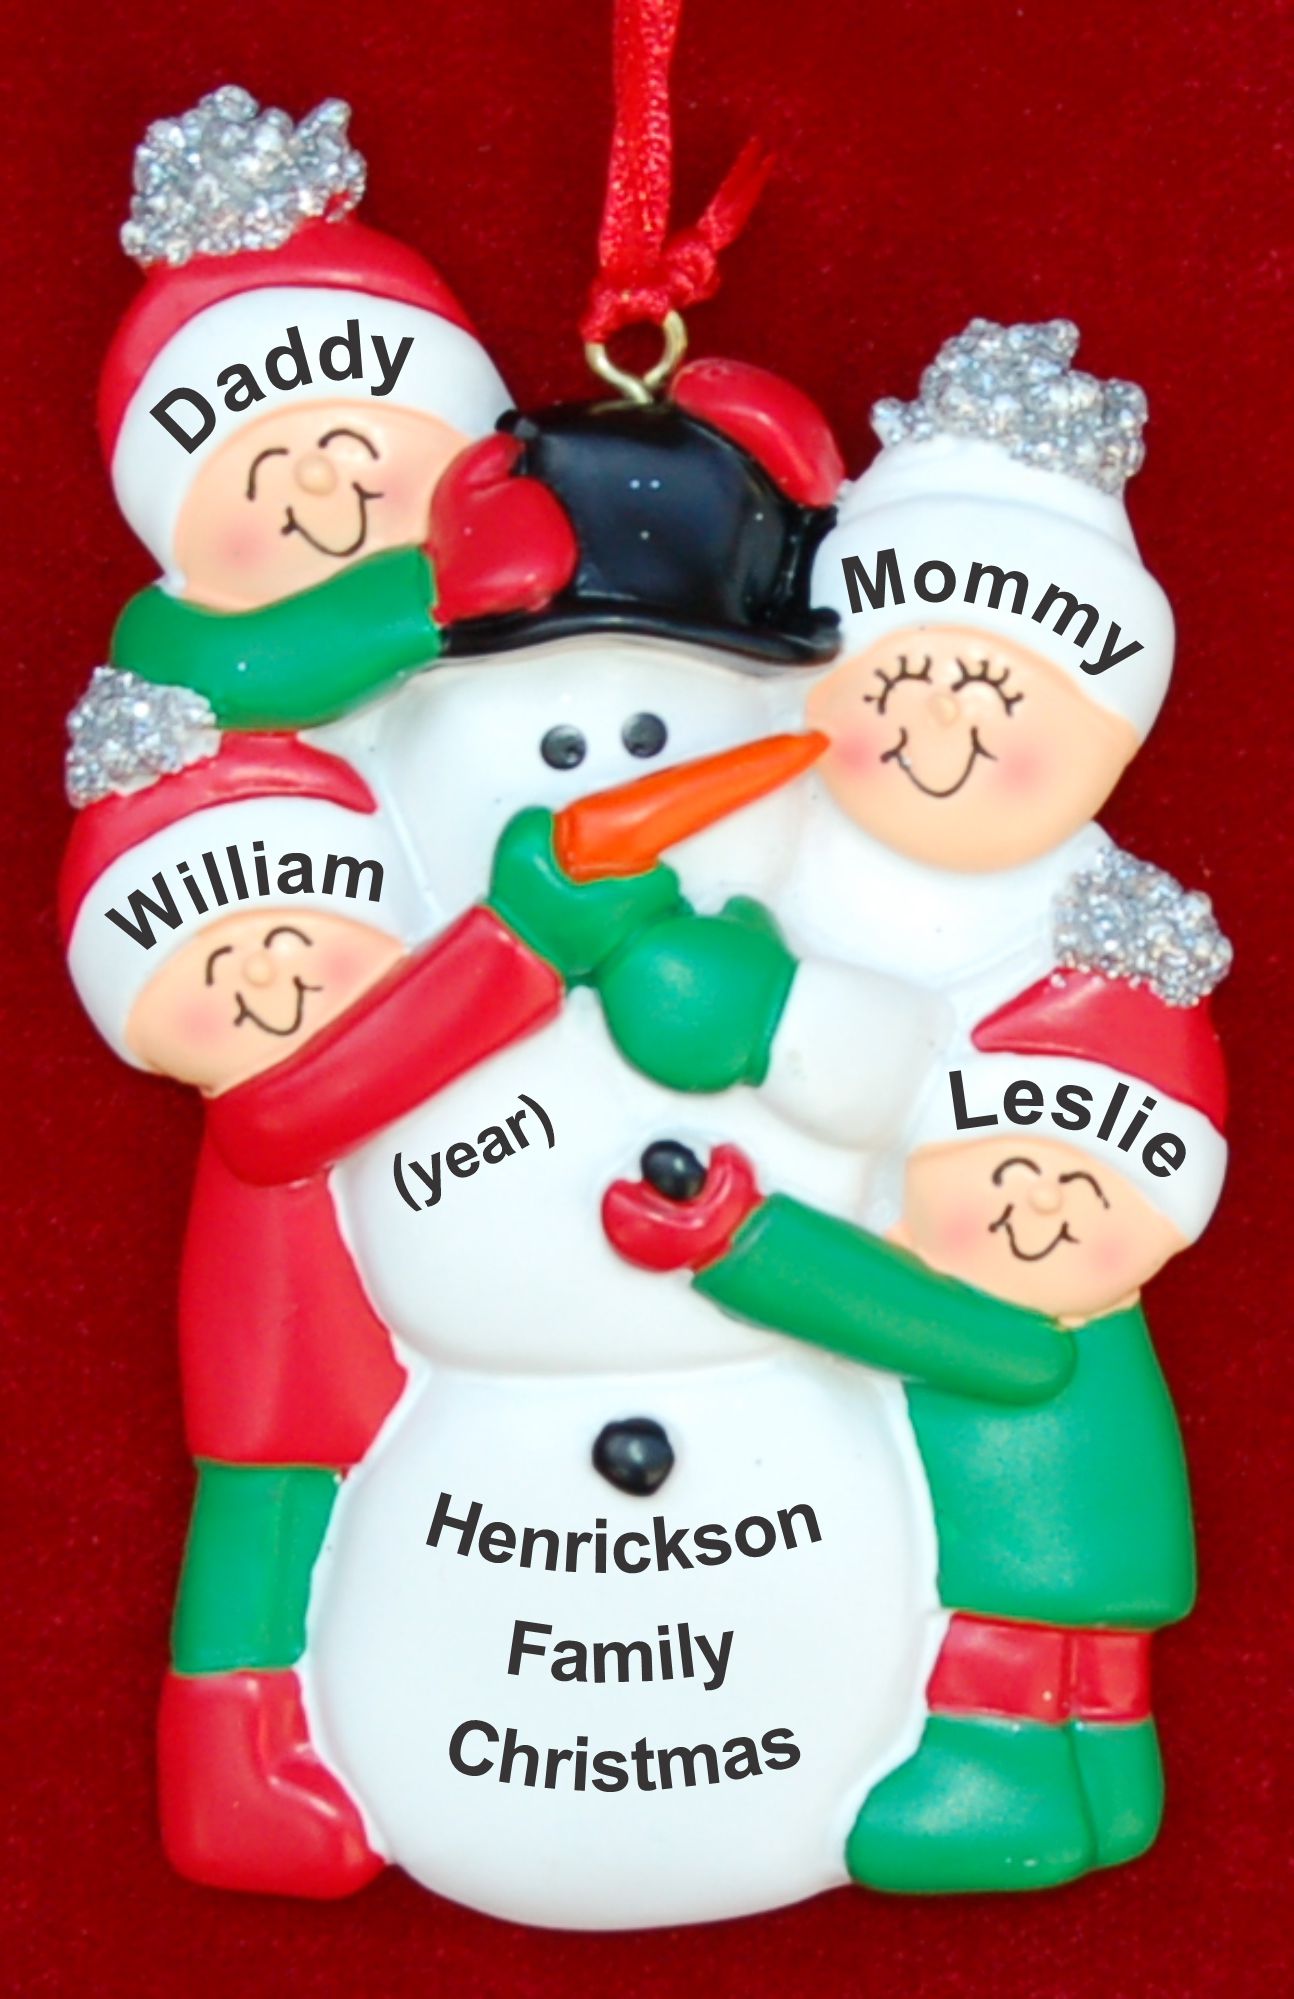 Family Christmas Ornament for 4 Making Snowman Personalized by RussellRhodes.com